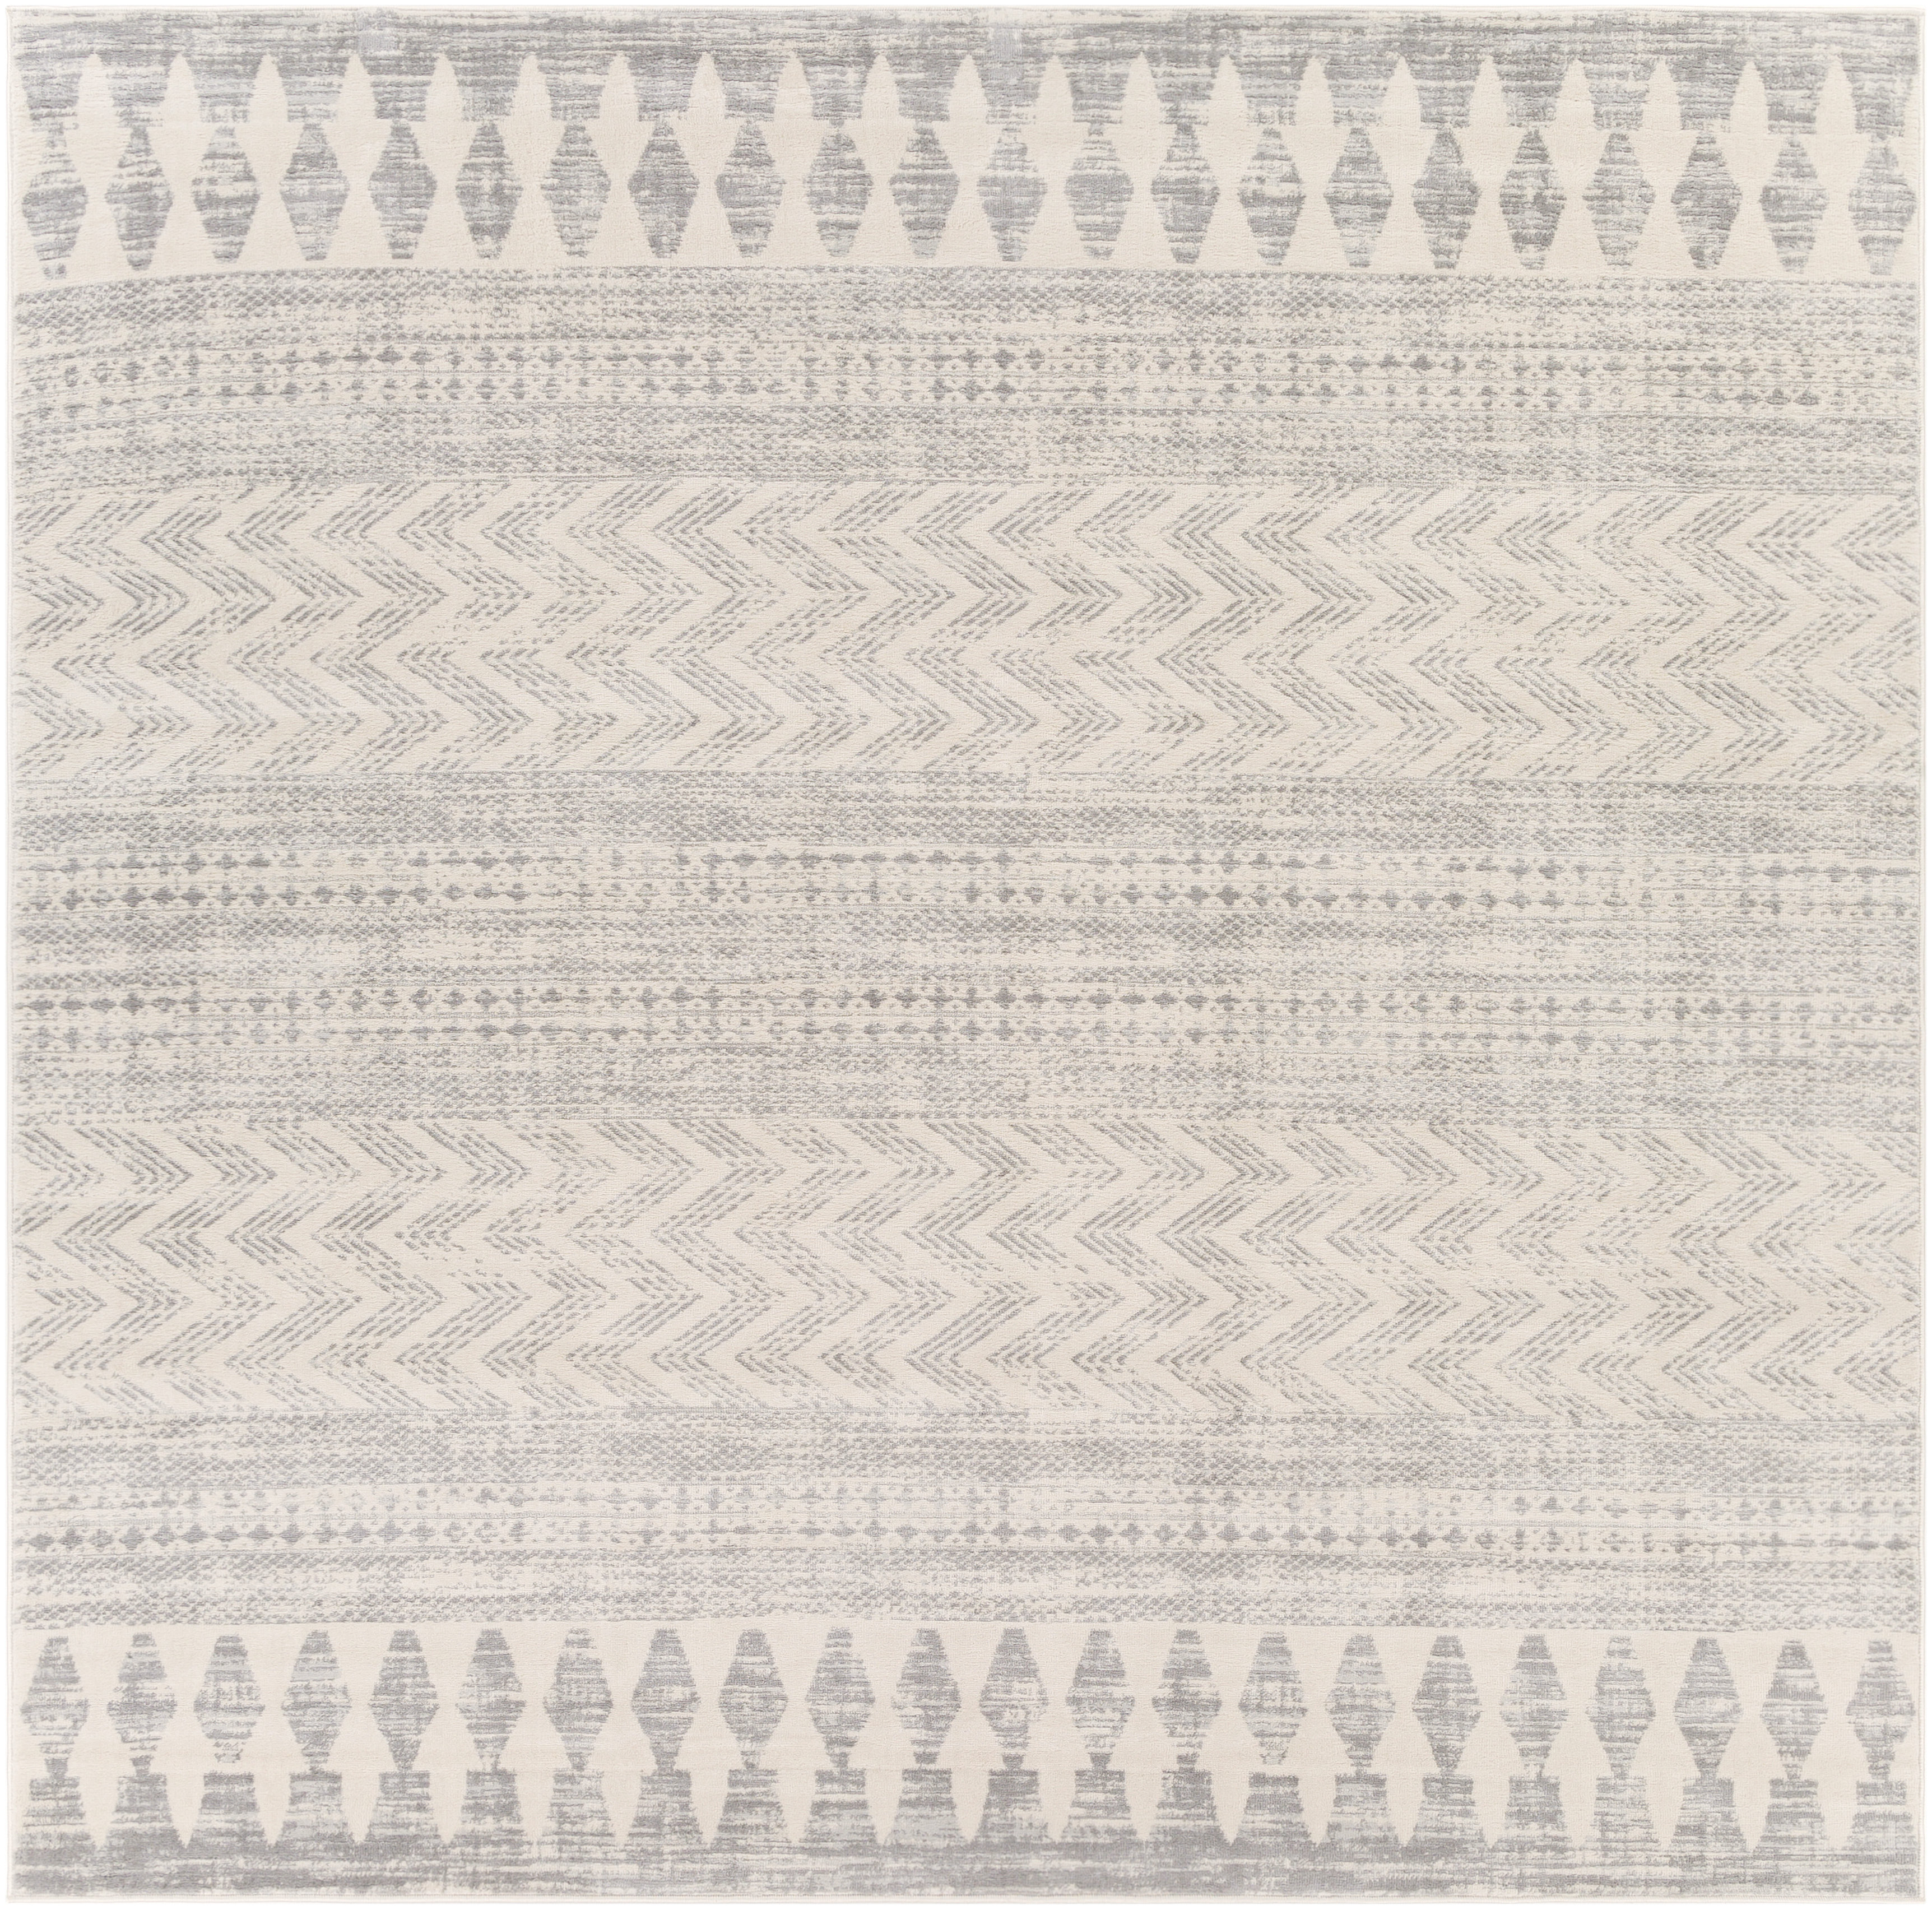 Outstanding square accent rugs Wayfair Square Area Rugs You Ll Love In 2021